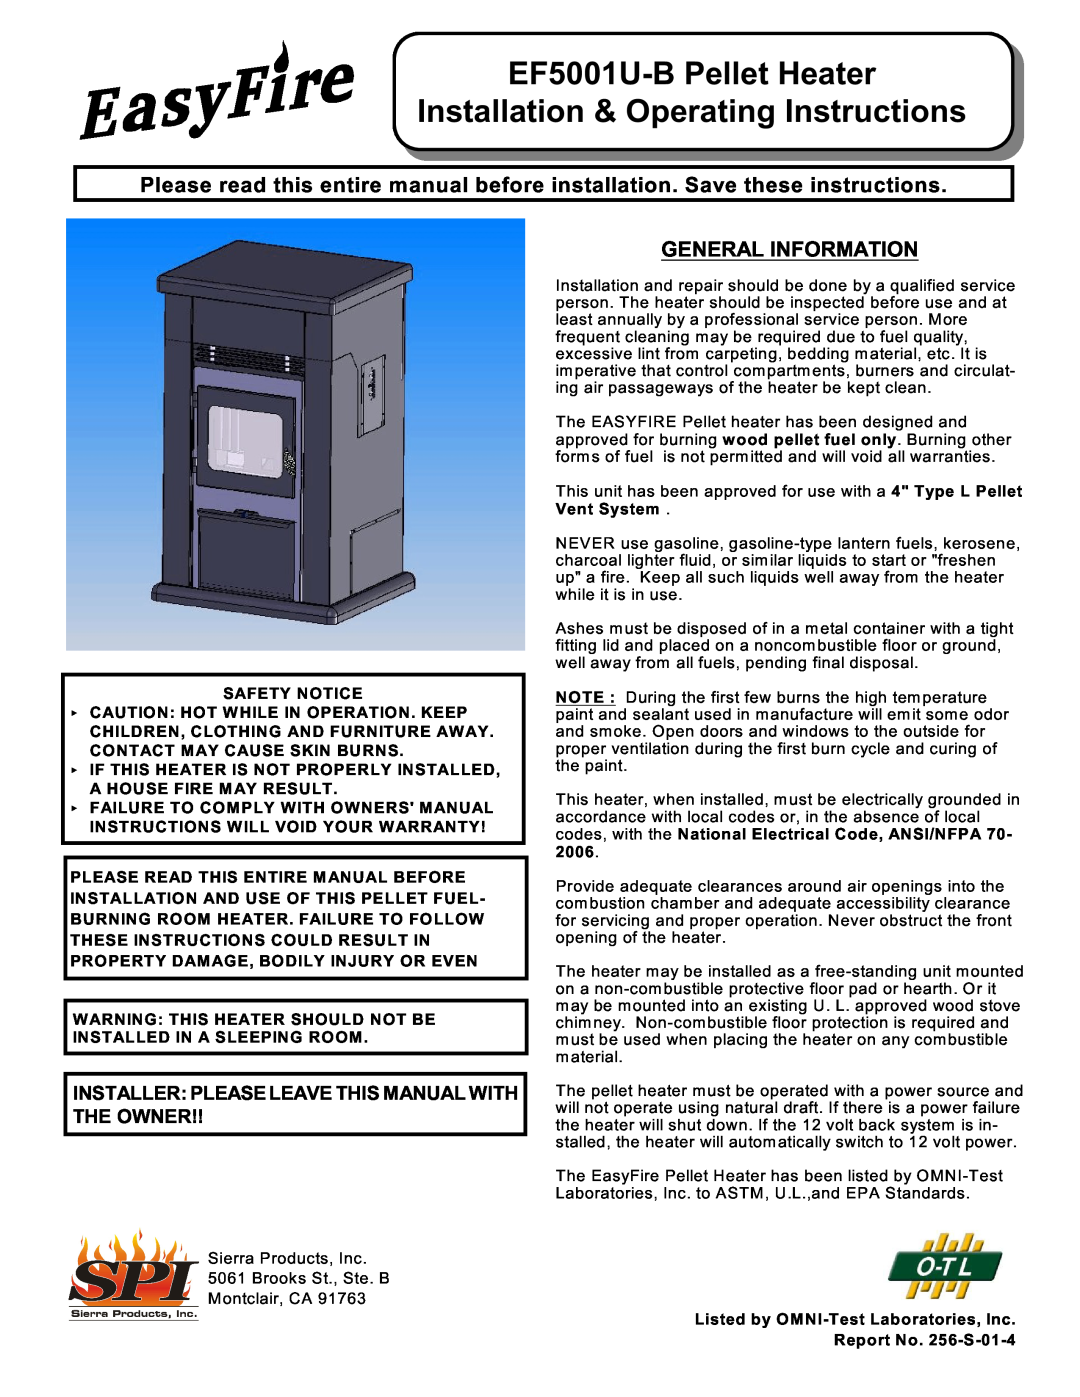 Sierra Products owner manual General Information, EF5001U-BPellet Heater, Installation & Operating Instructions 